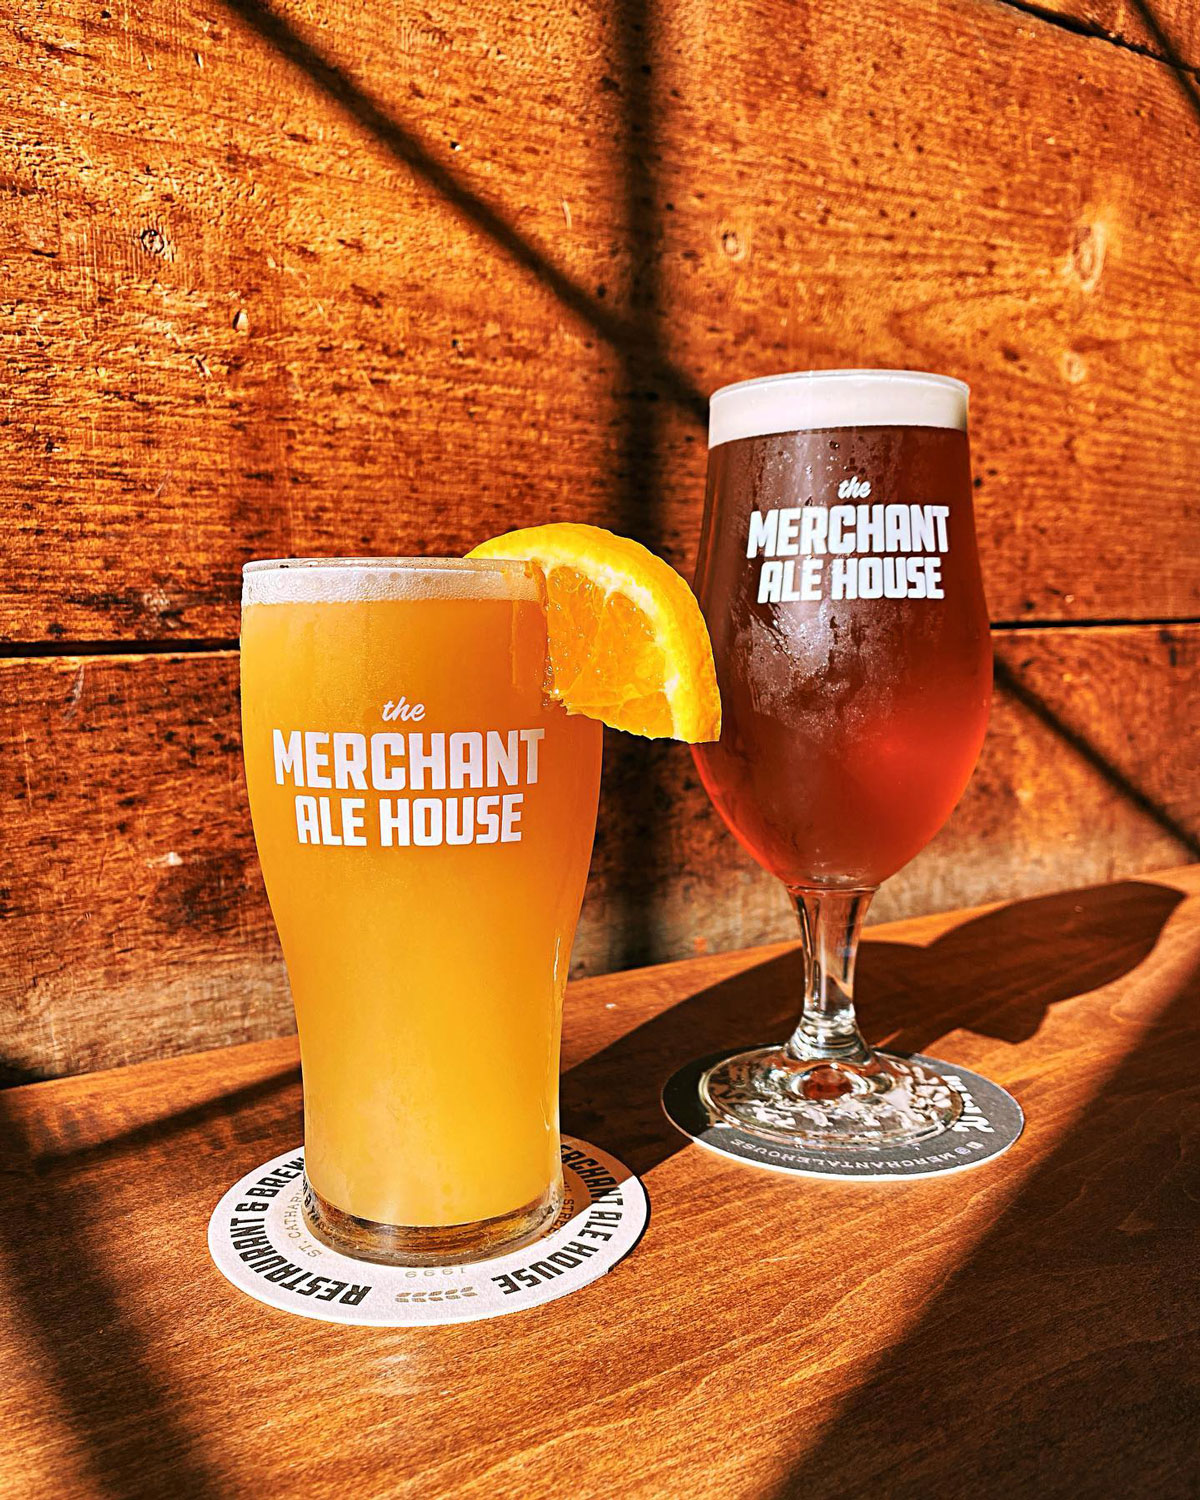 There's a drink for every season at the Merchant Ale House.